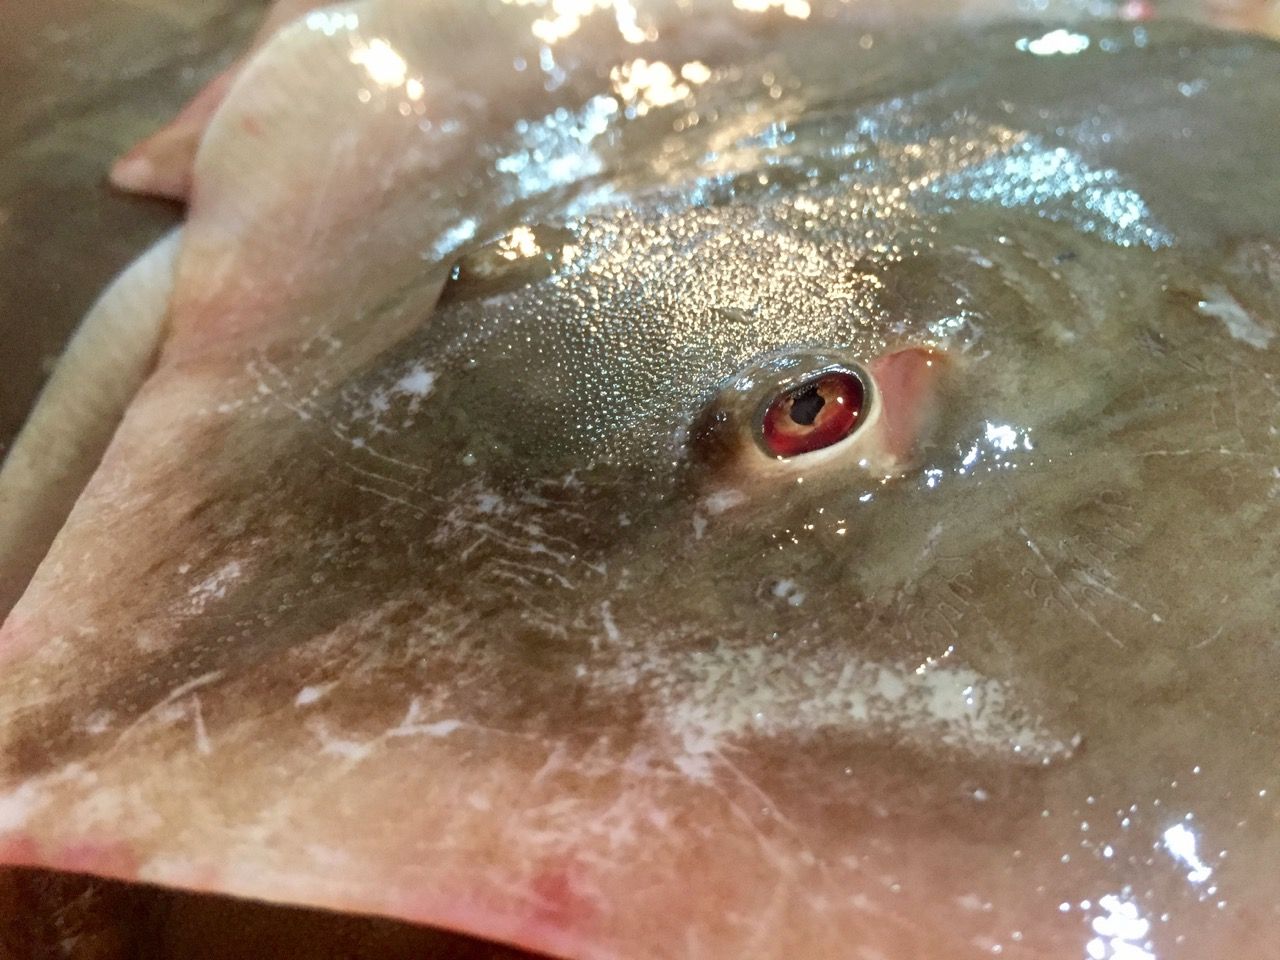 Close-up of a ray for sale.